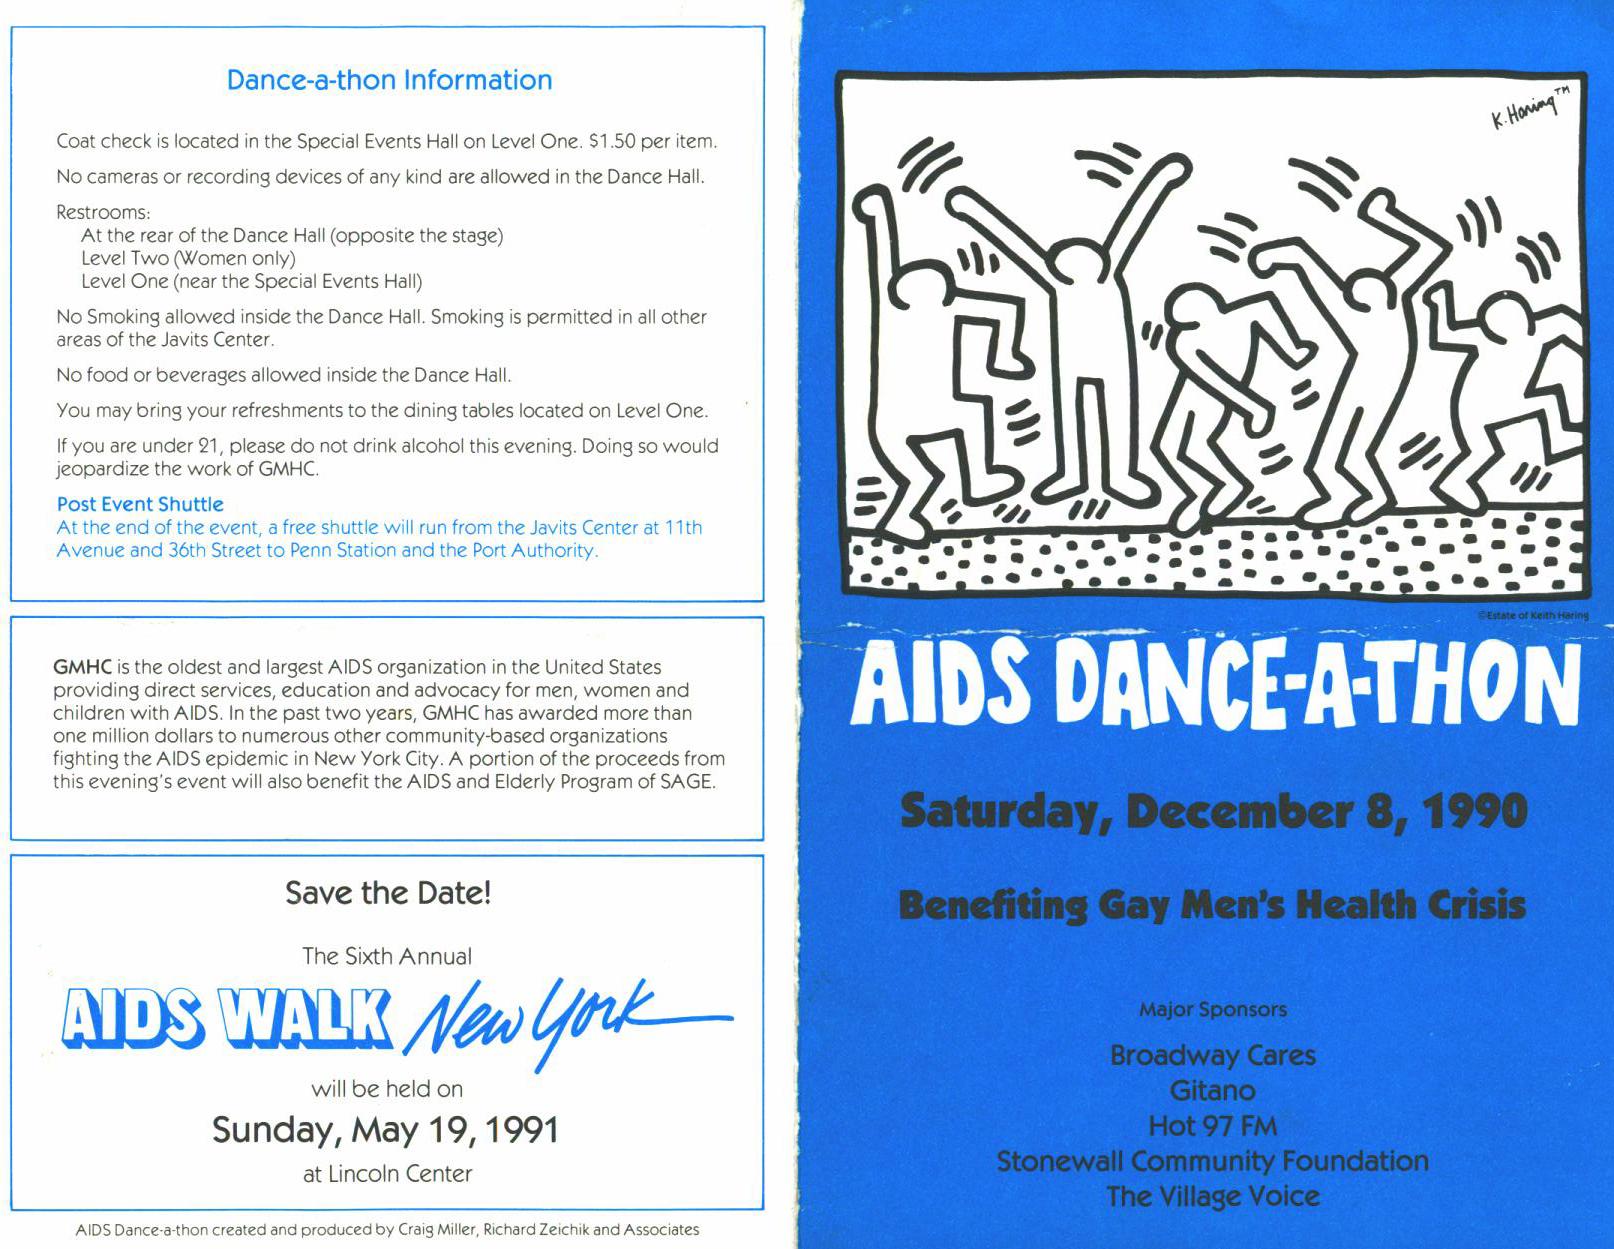 Keith Haring AIDS Dance-A-Thon 1990 (vintage Keith Haring)  - Print by (after) Keith Haring